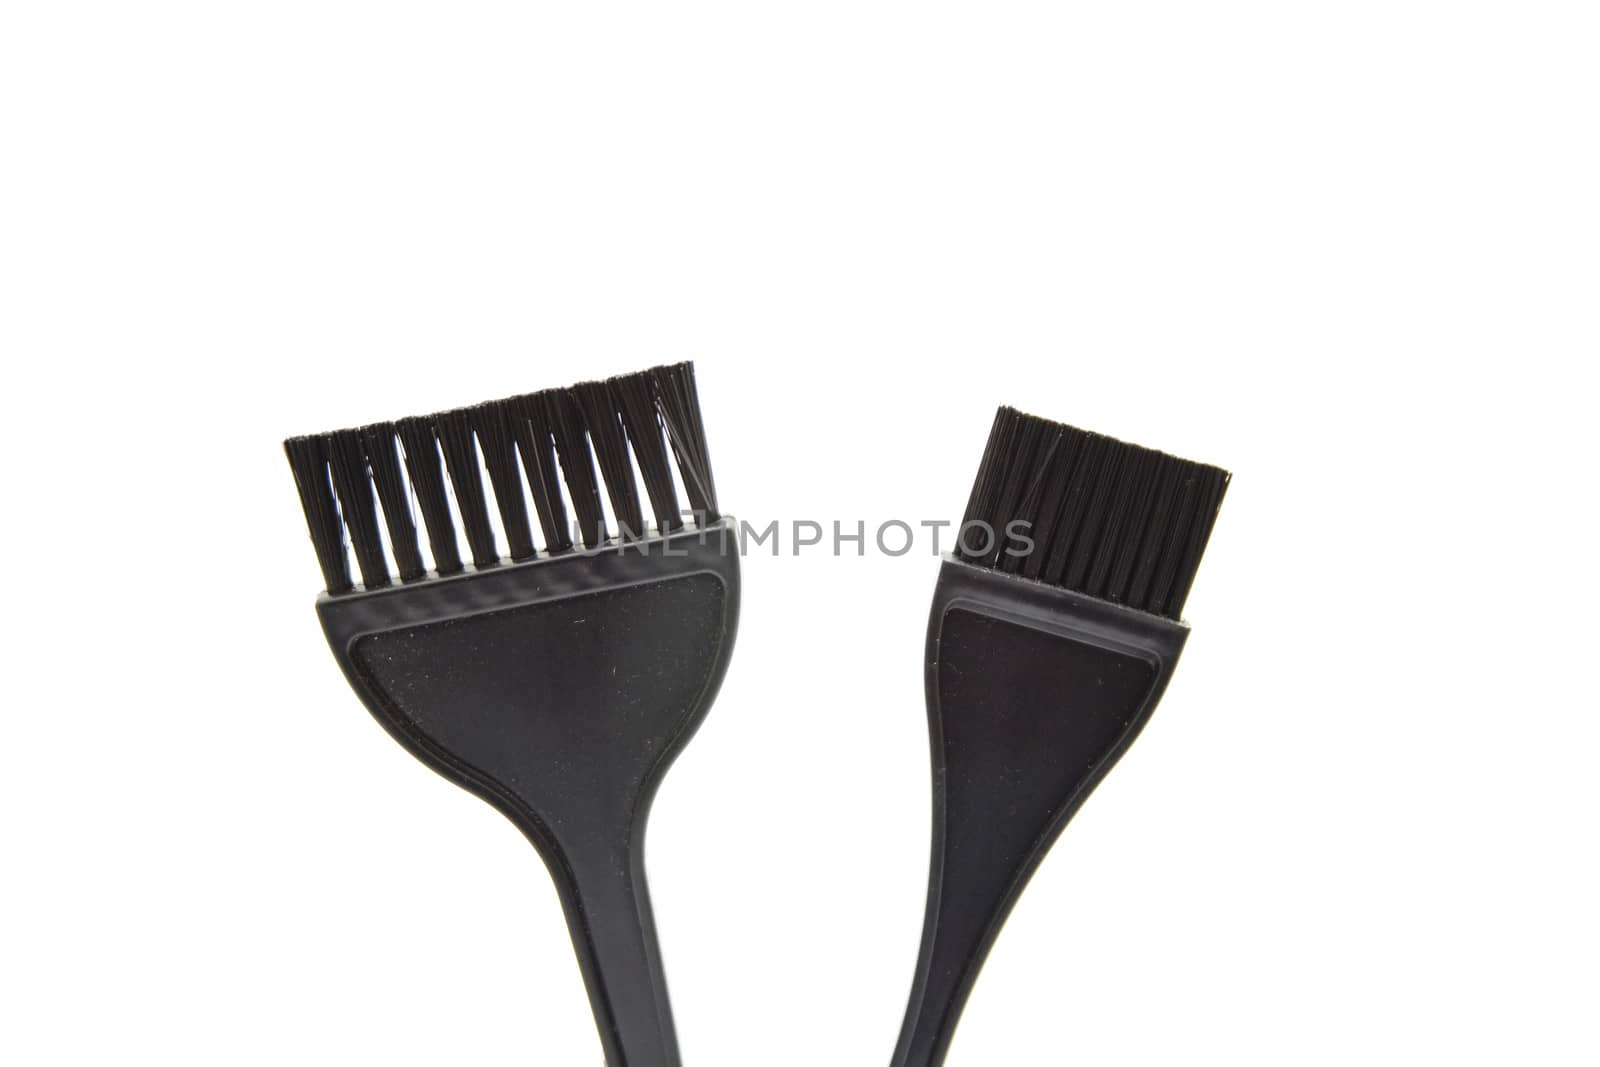 Coloring Hair Brush on white background